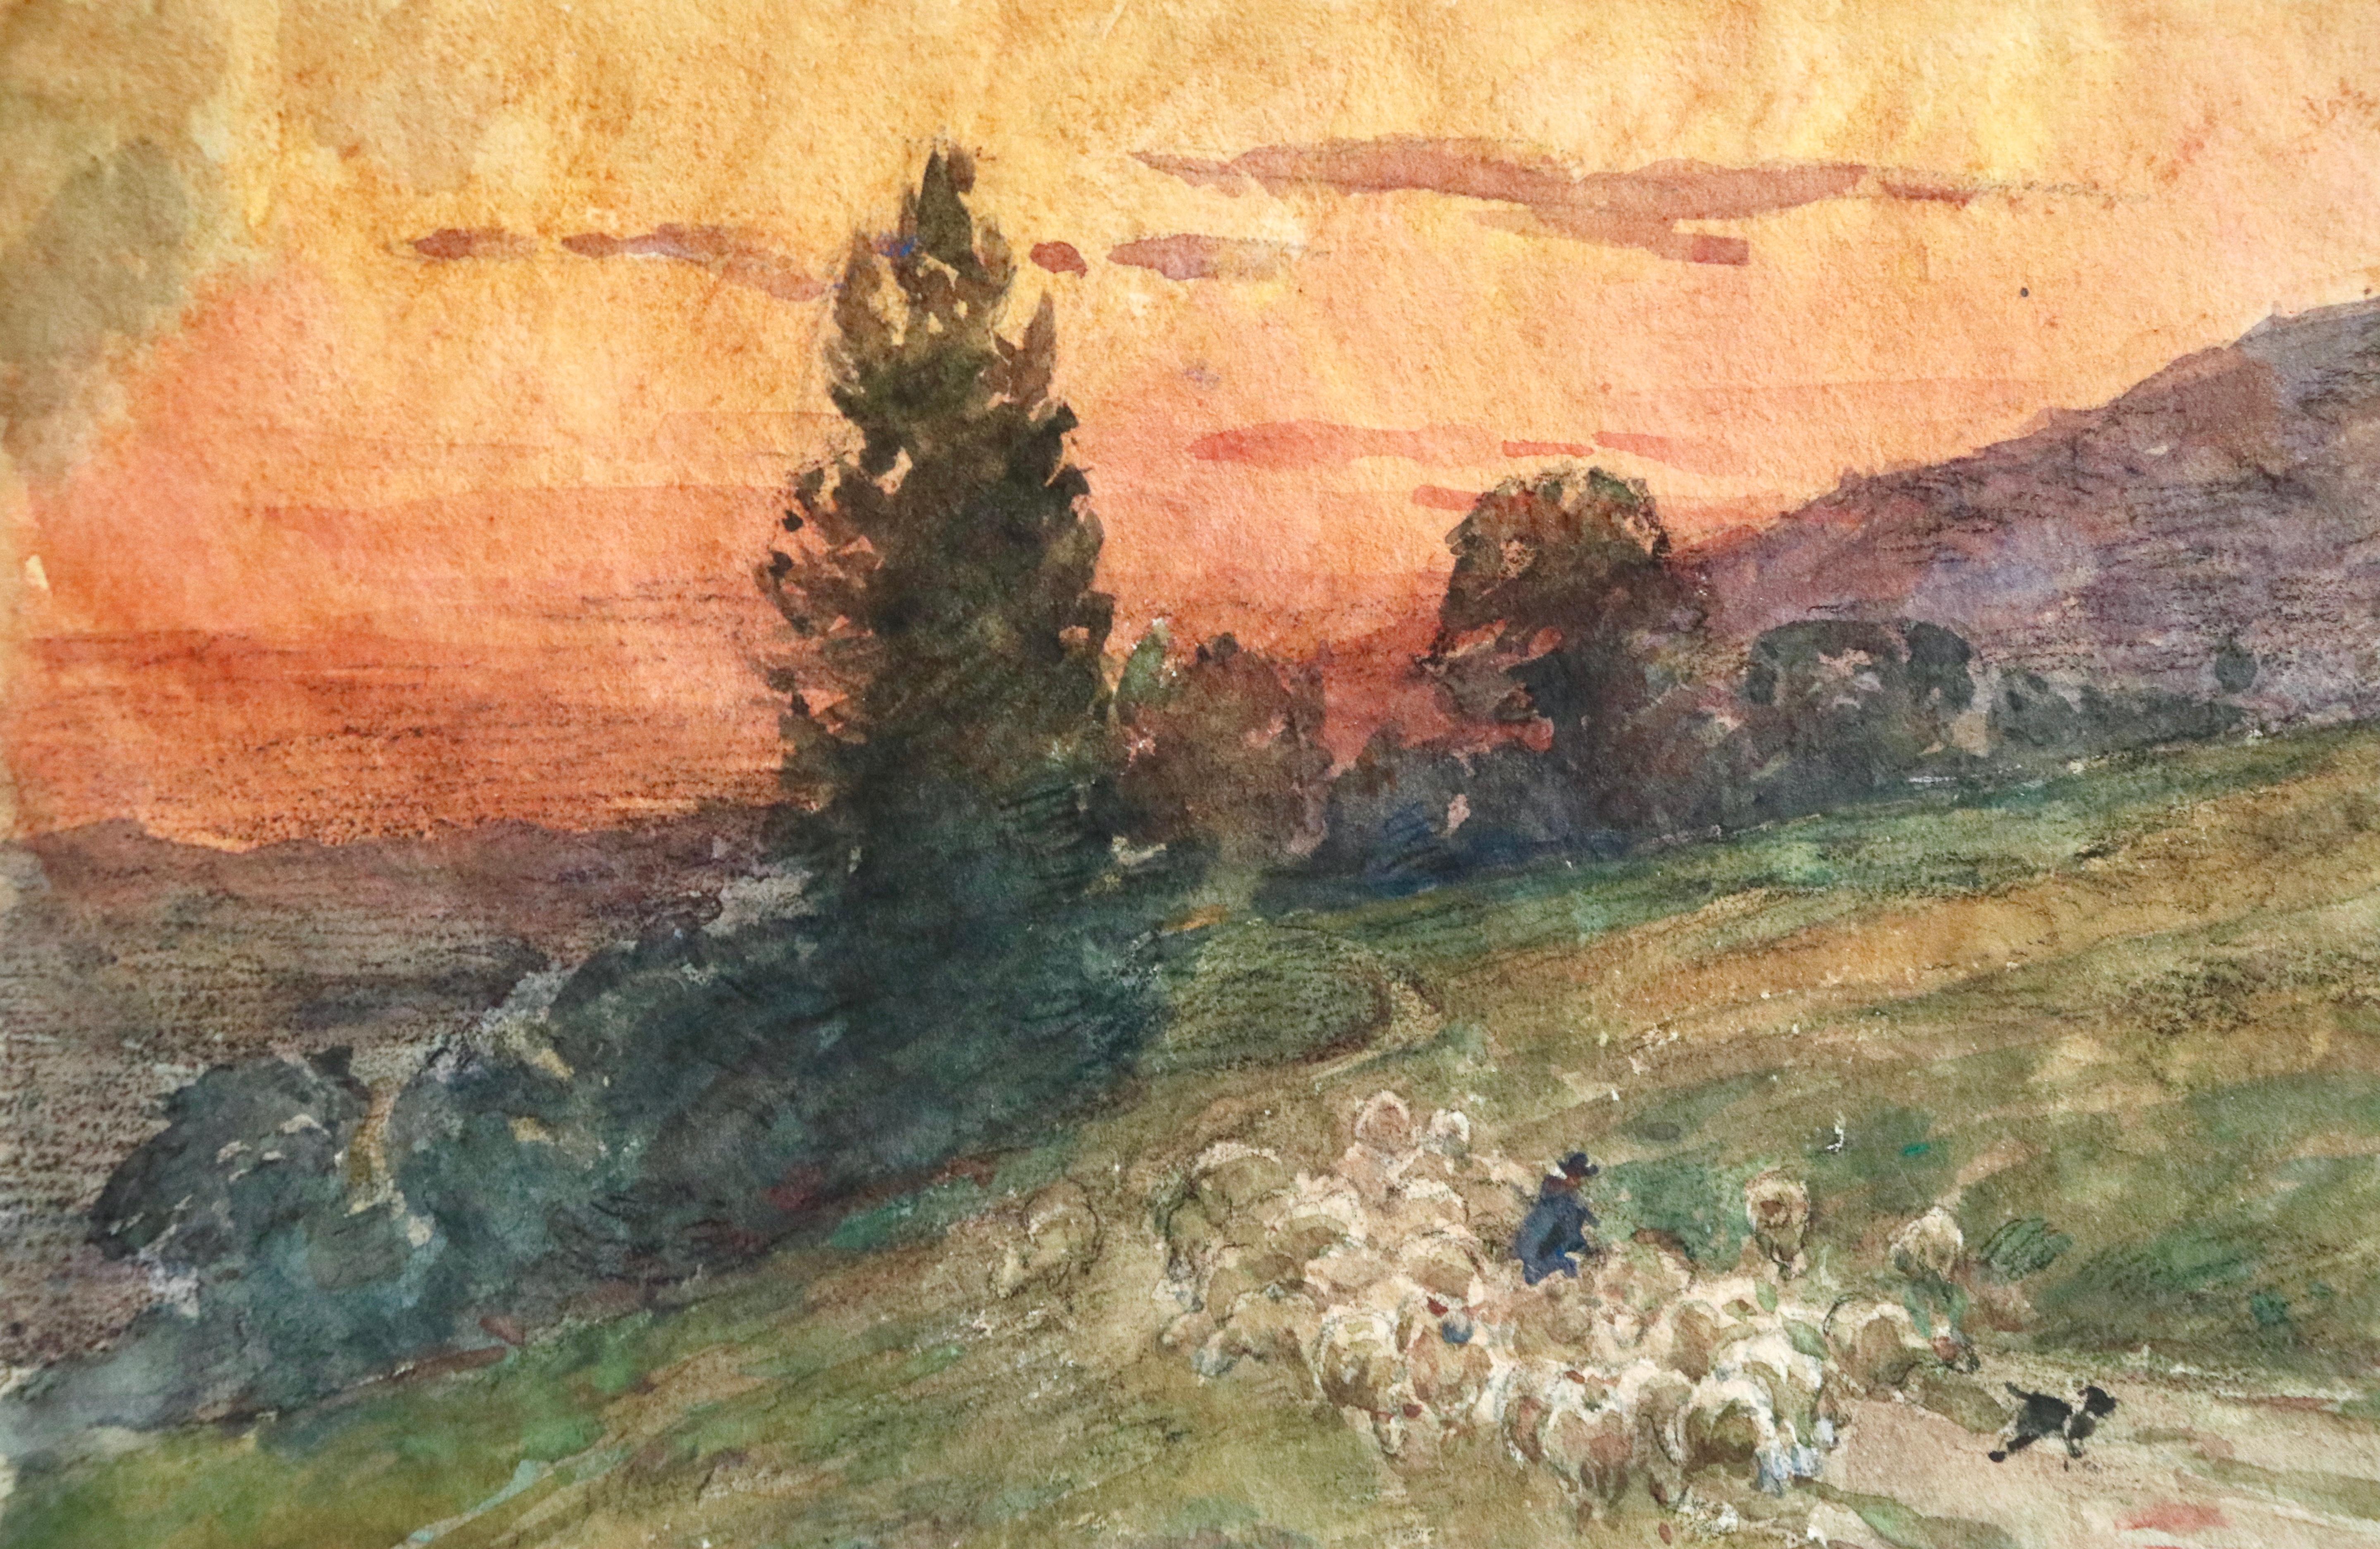 Watercolour on paper circa 1902 by Henri Duhem depicting a shepherd with his sheep dog droving his flock of sheep as the sunset glows red behind the trees. Signed lower left. This painting is not currently framed but a suitable frame can be sourced